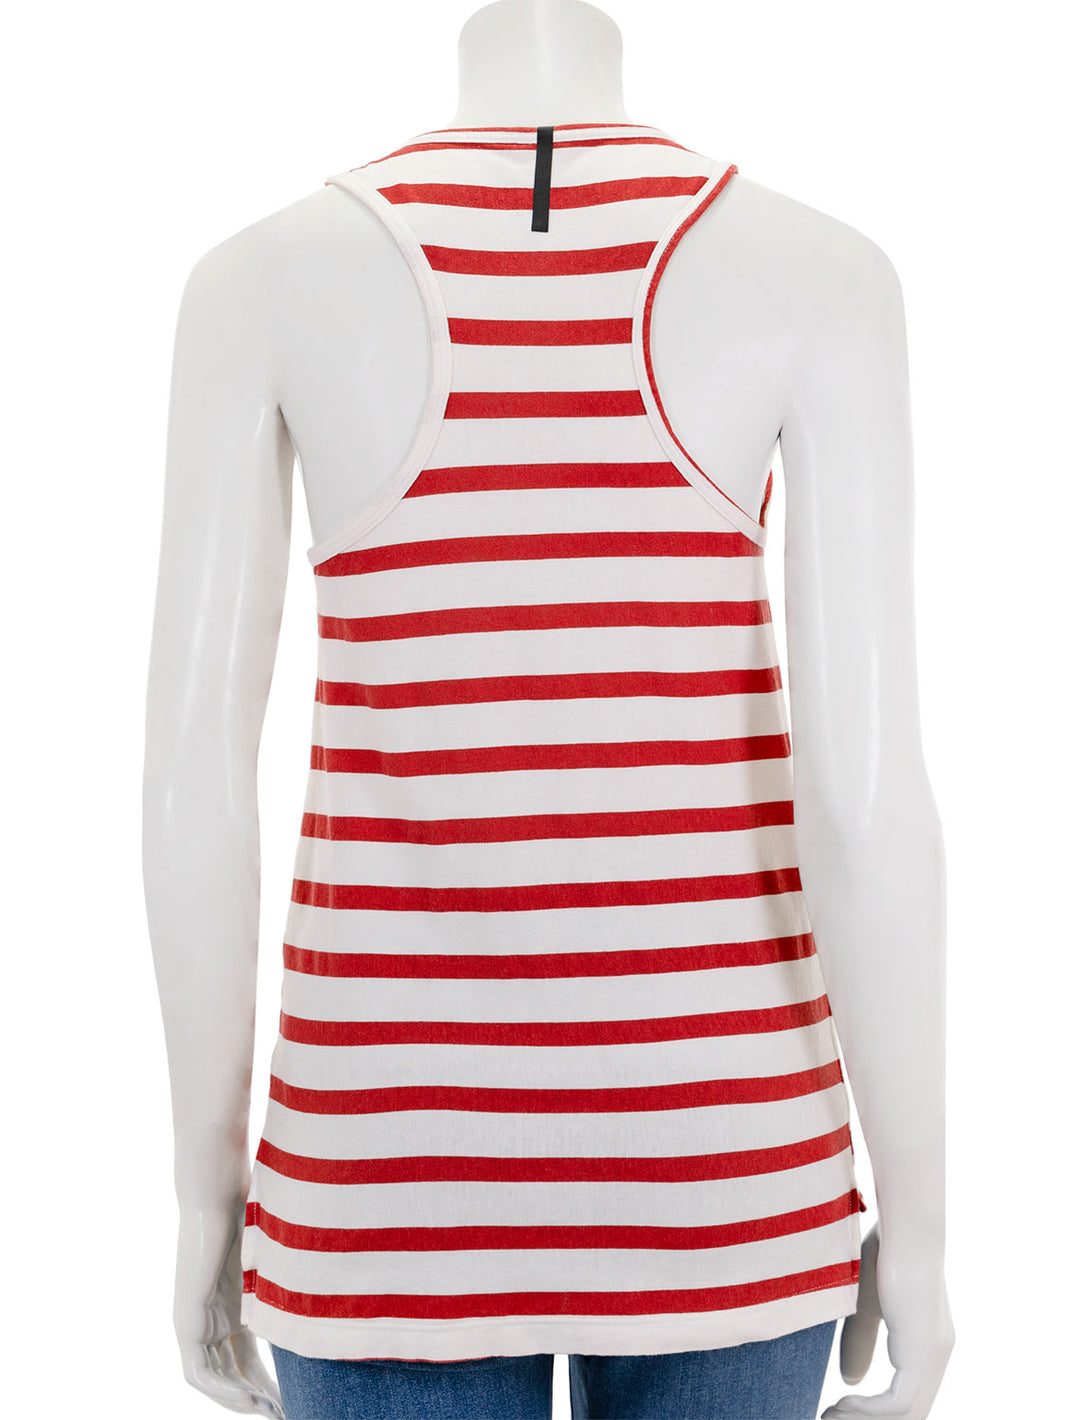 Back view of ASKK NY's printed tank in red and white stripe.